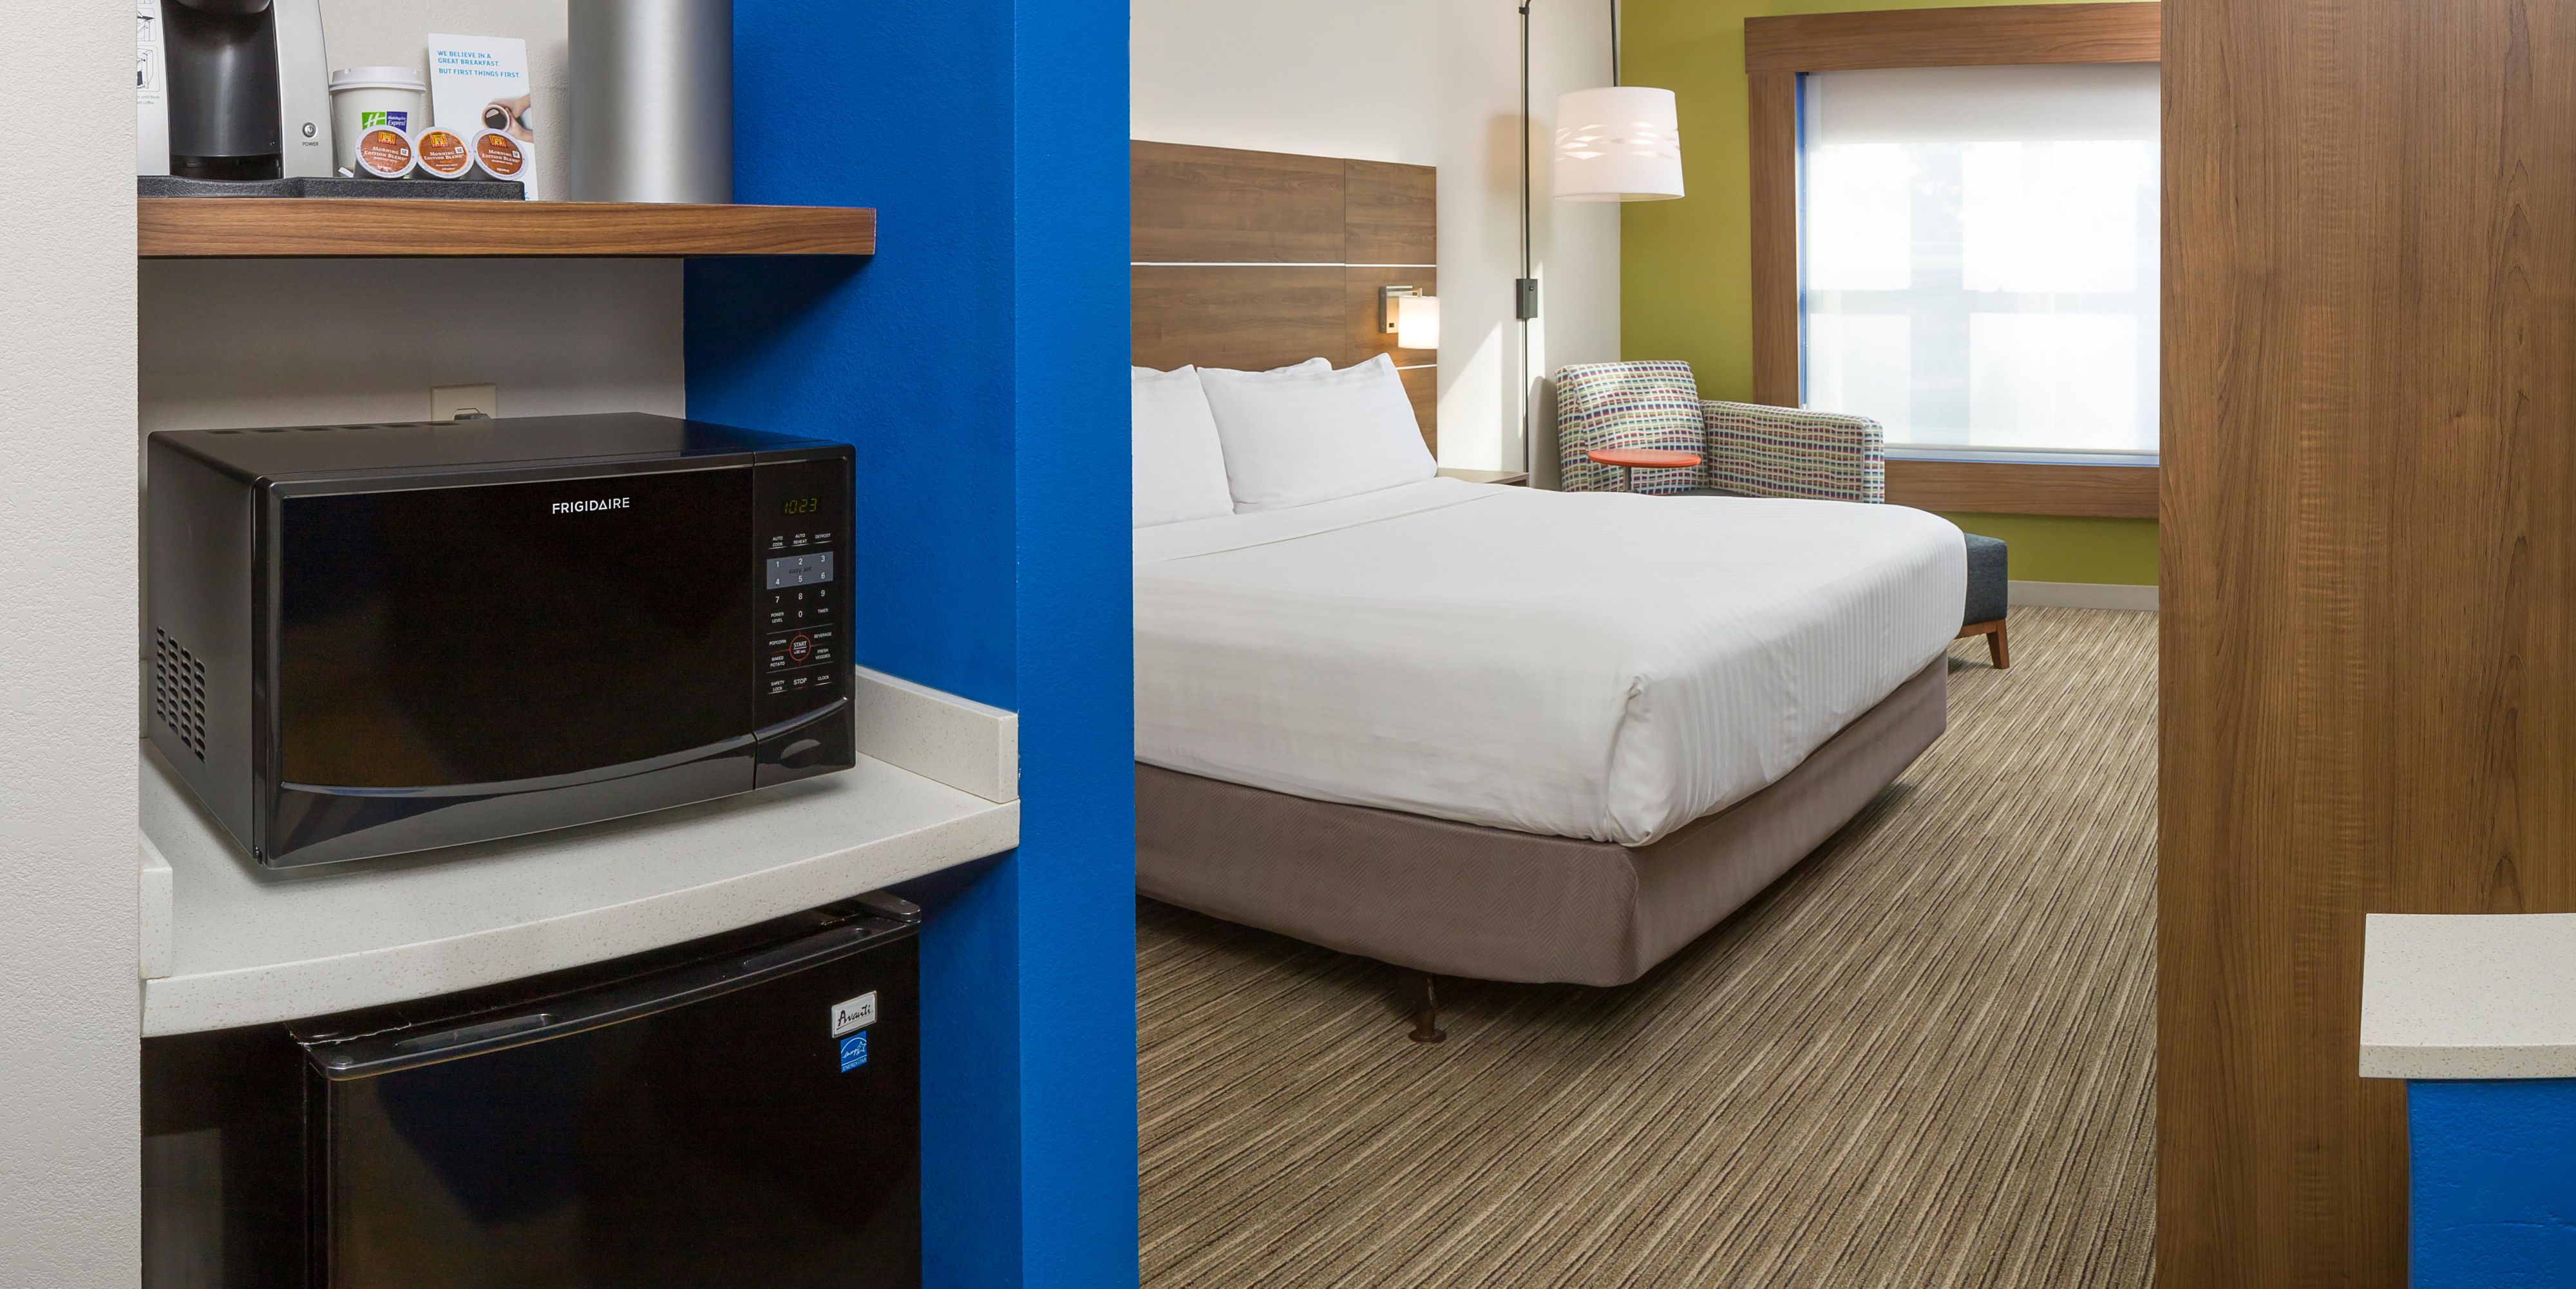 Make this your Home Away From Home! Stay 7 or more nights at the Holiday Inn Express & Suites White River Junction and enjoy all the amenities you need to live, work, and relax! 